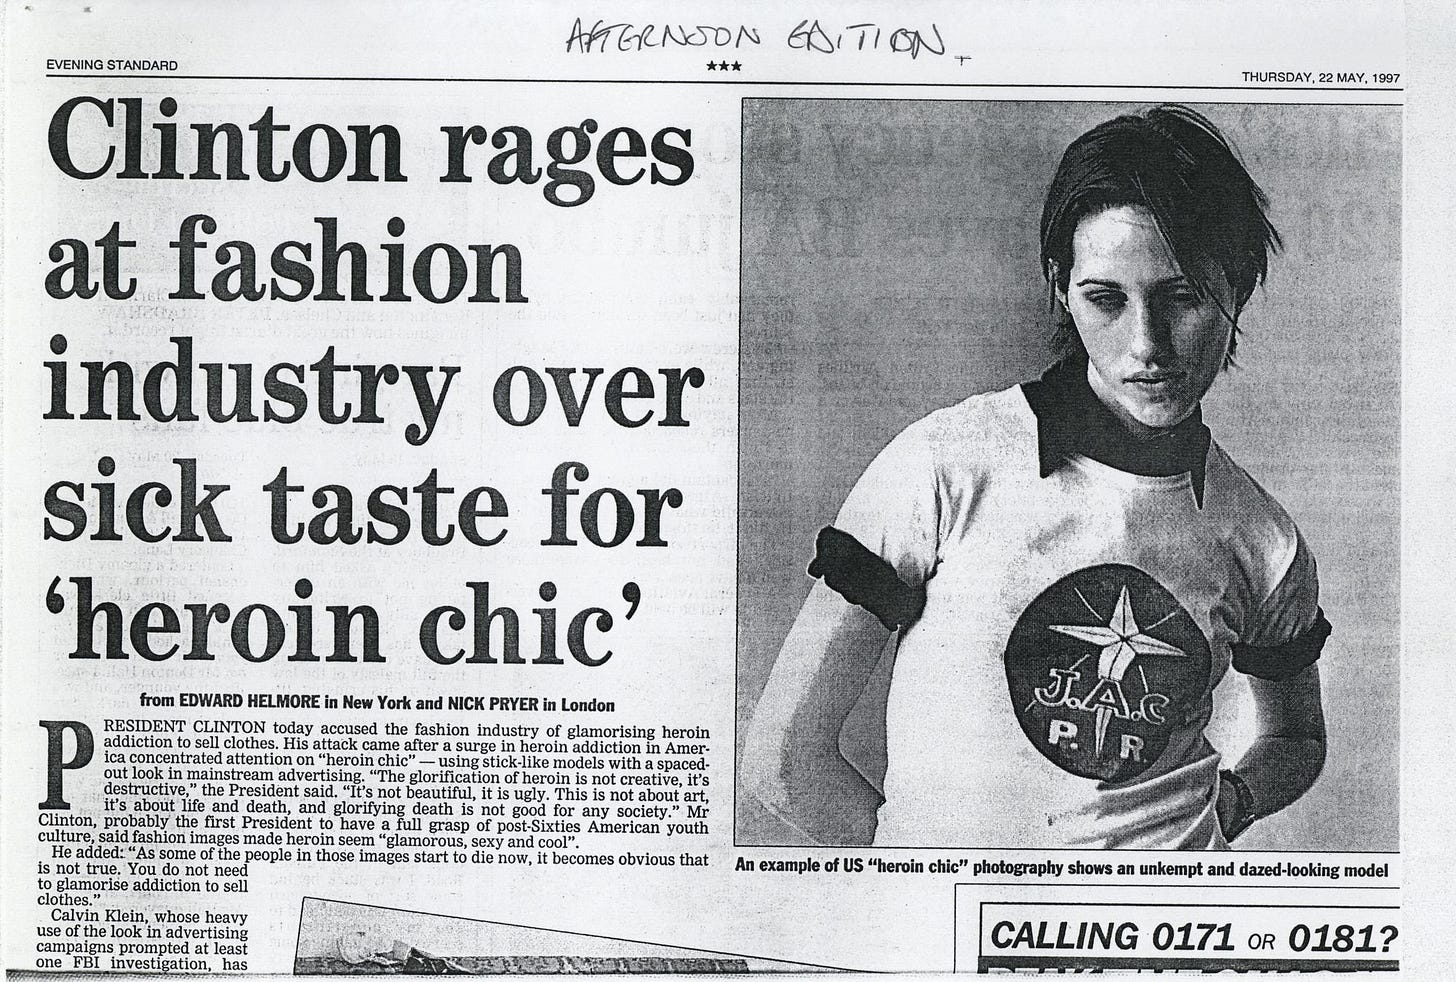 Why are we even talking about “Heroin Chic” again? — SHARED Magazine